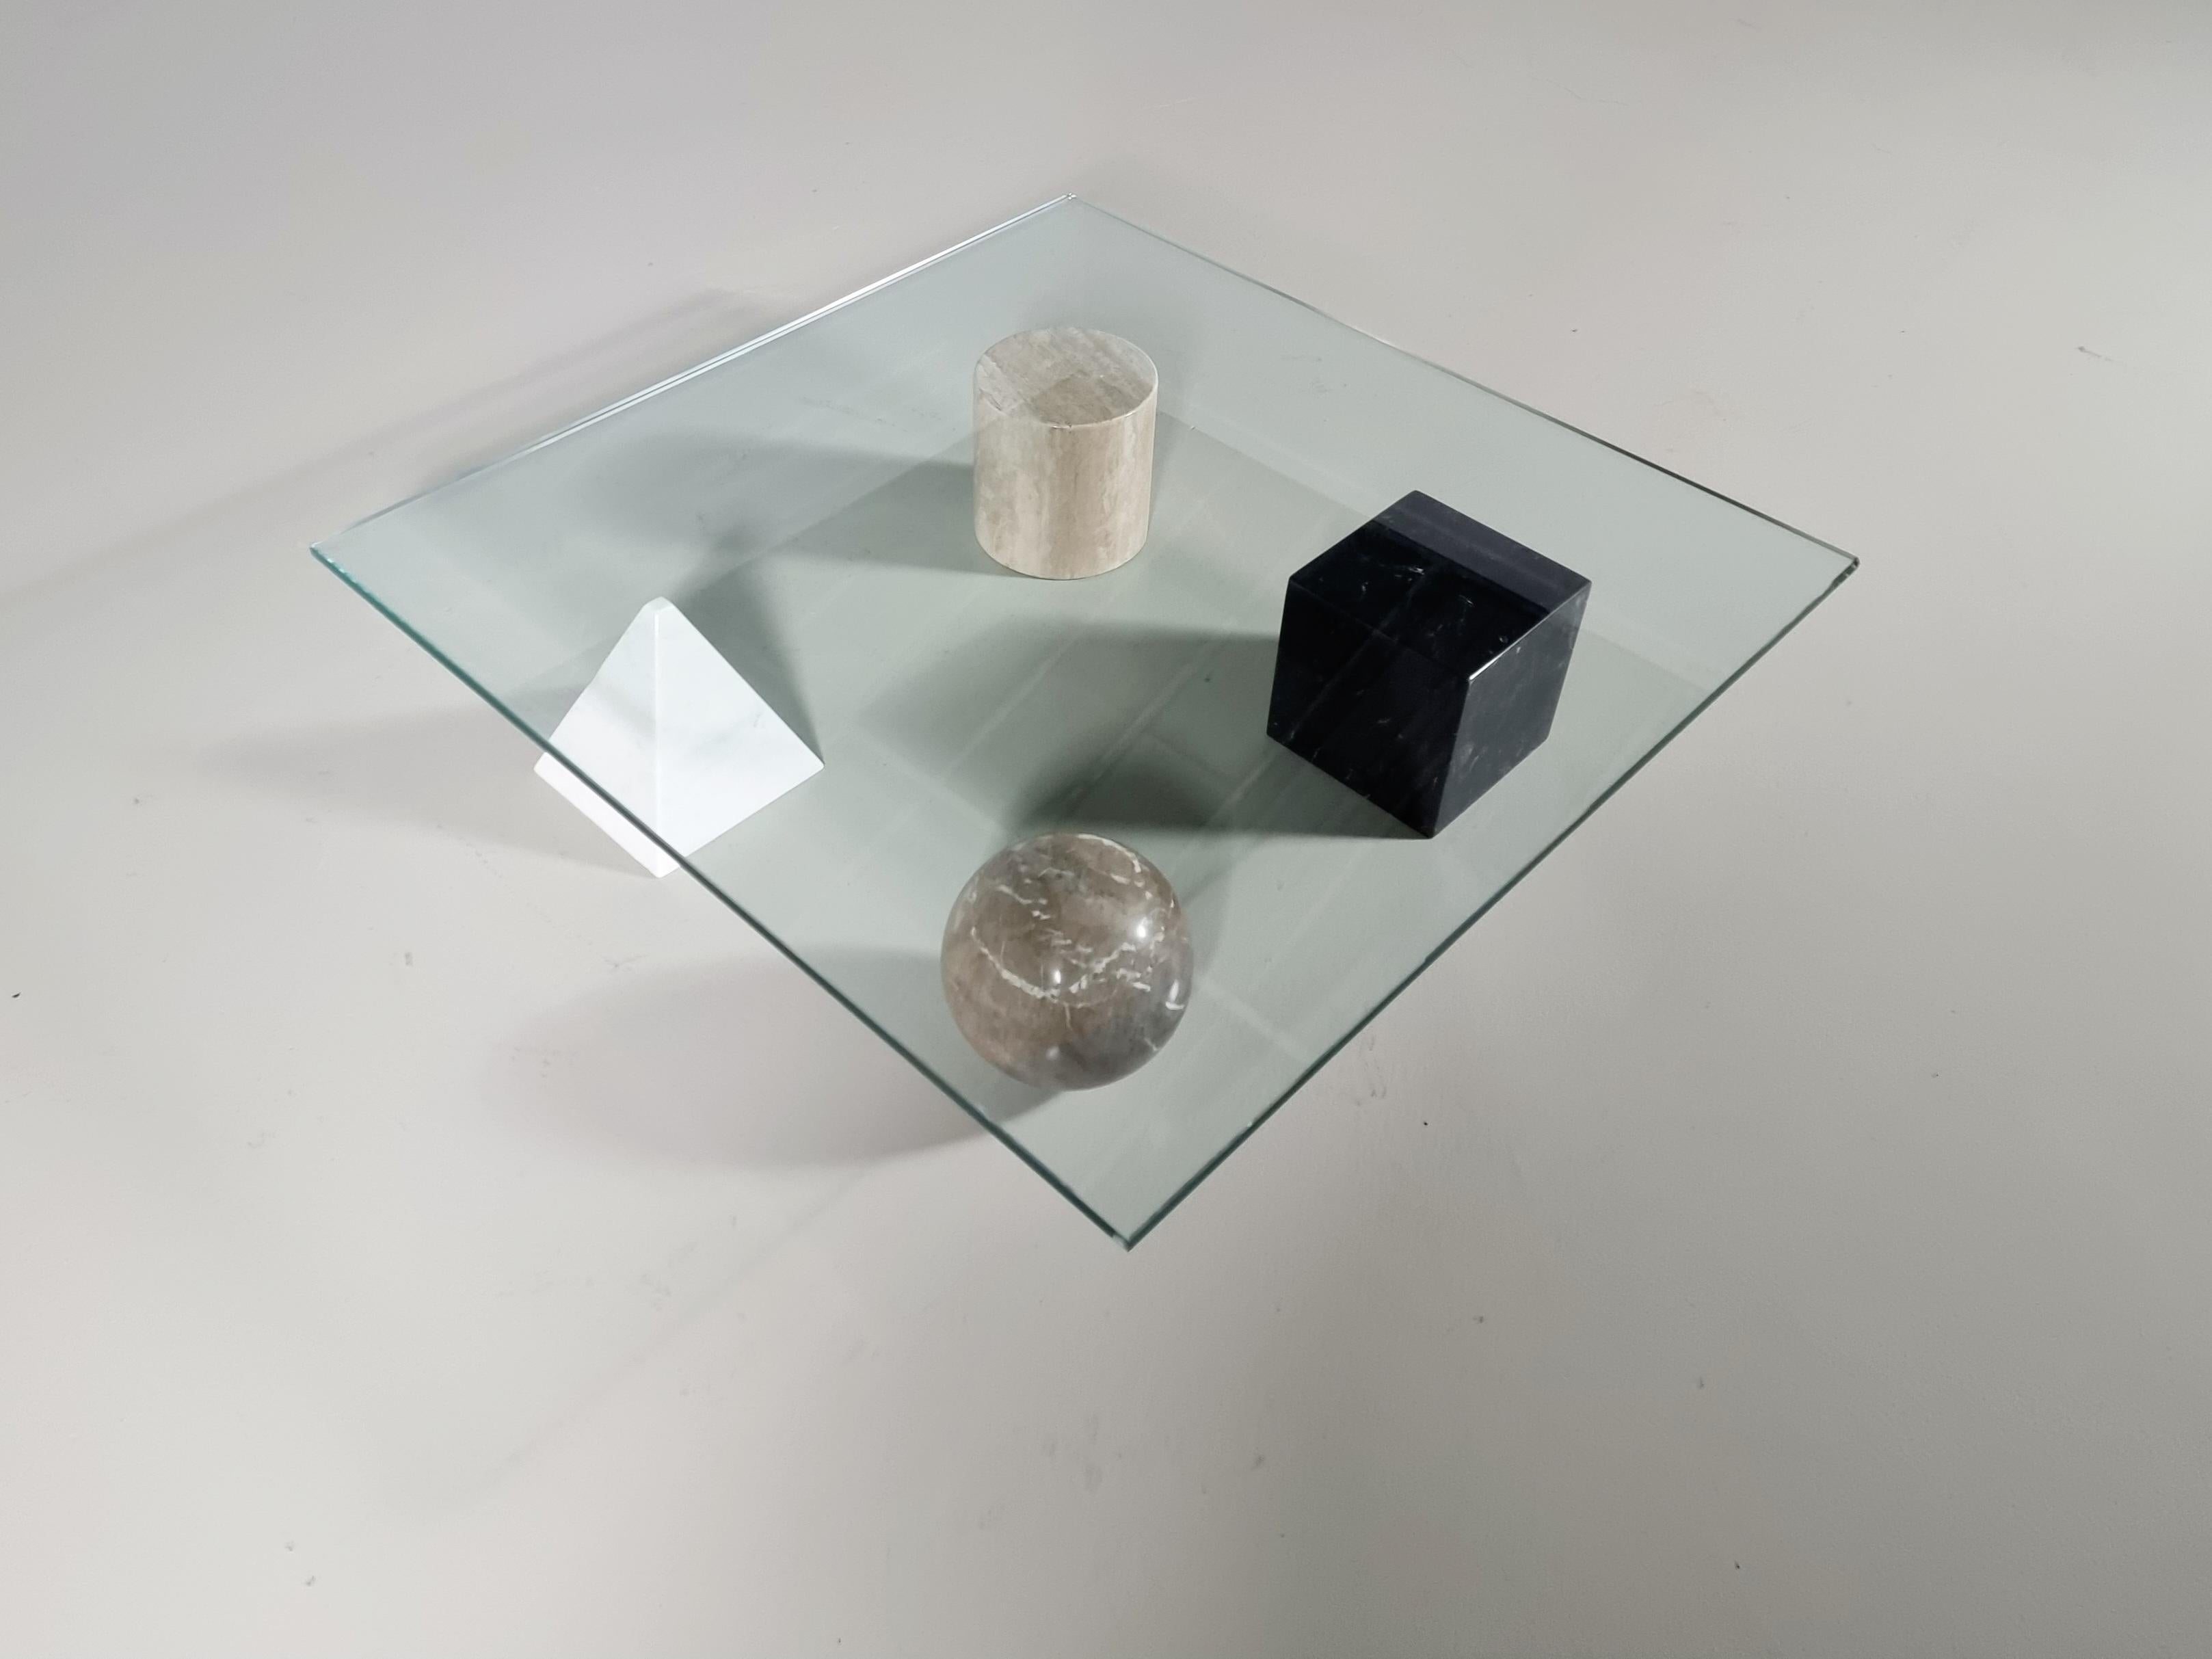 Sculptural Metafora coffee table designed by Lella and Massimo Vignelli. in the 1970s. Inspired by the four forms of Euclidean geometry, the cube, the pyramid, the cylinder, and the sphere, the four elements can be positioned freely for a unique